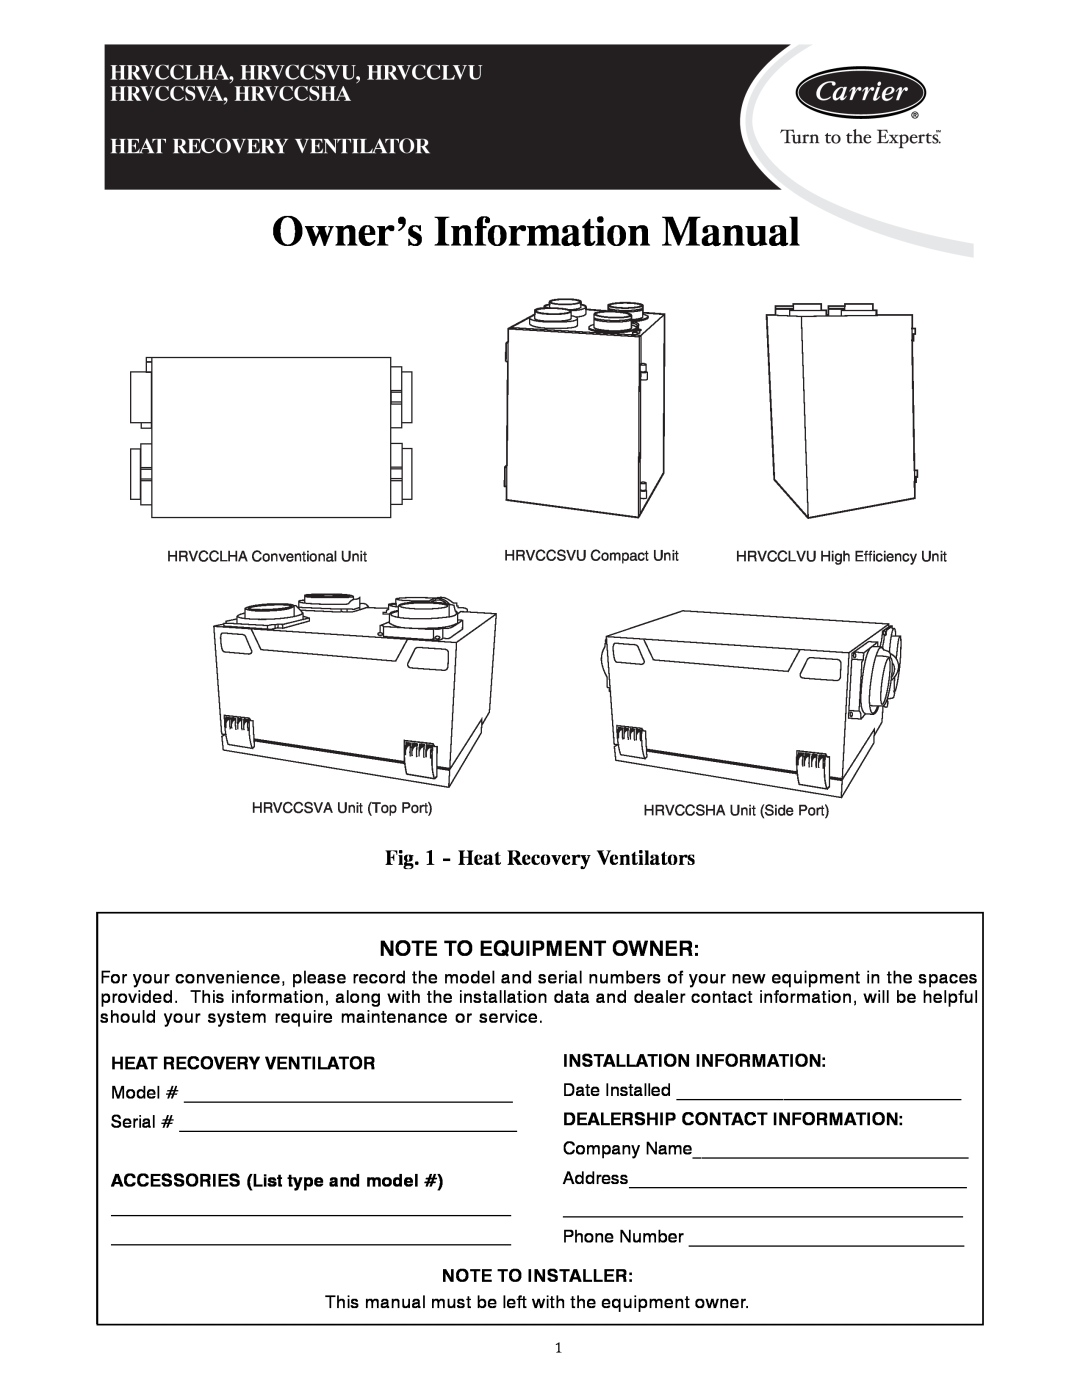 Carrier HRVCCSHA manual Heat Recovery Ventilators, Owner’s Information Manual, Note To Equipment Owner, Note To Installer 